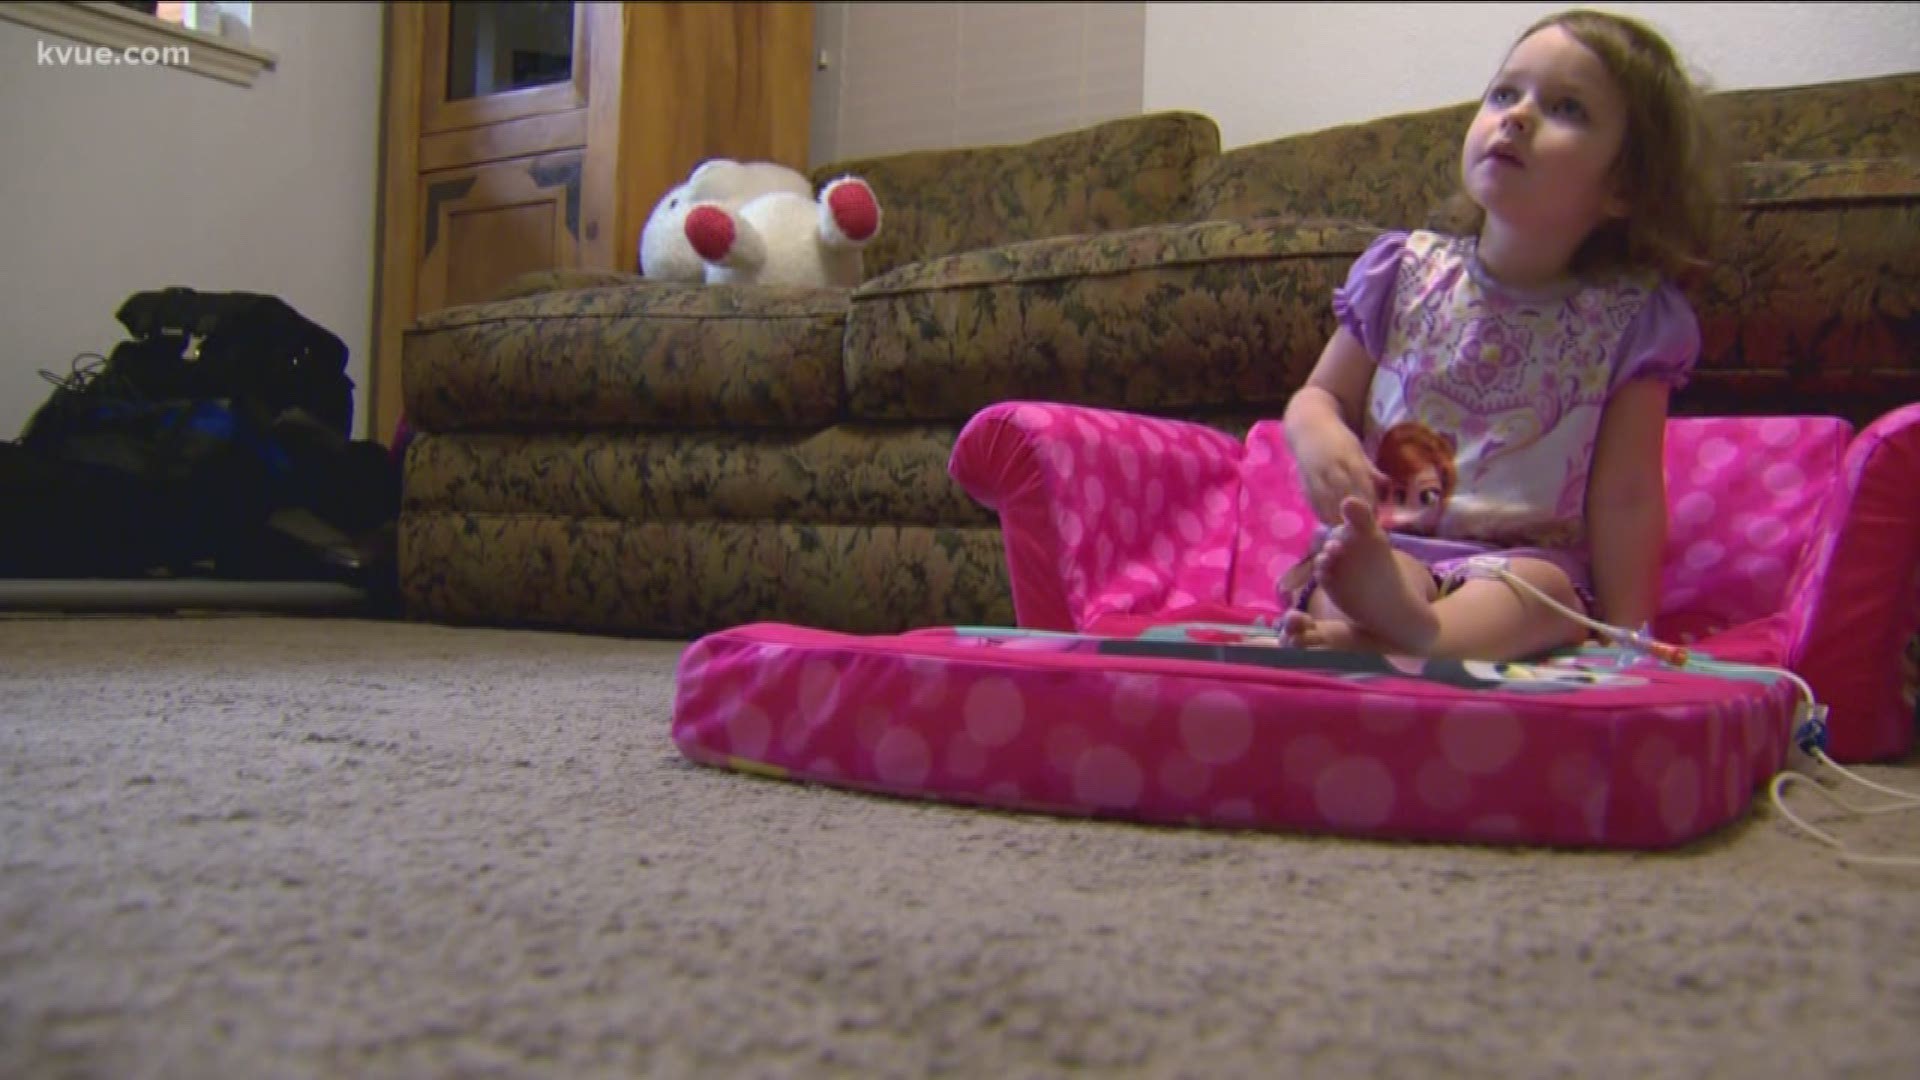 A Cedar Park family's daughter lives with Rett Syndrome, which impacts the whole family.